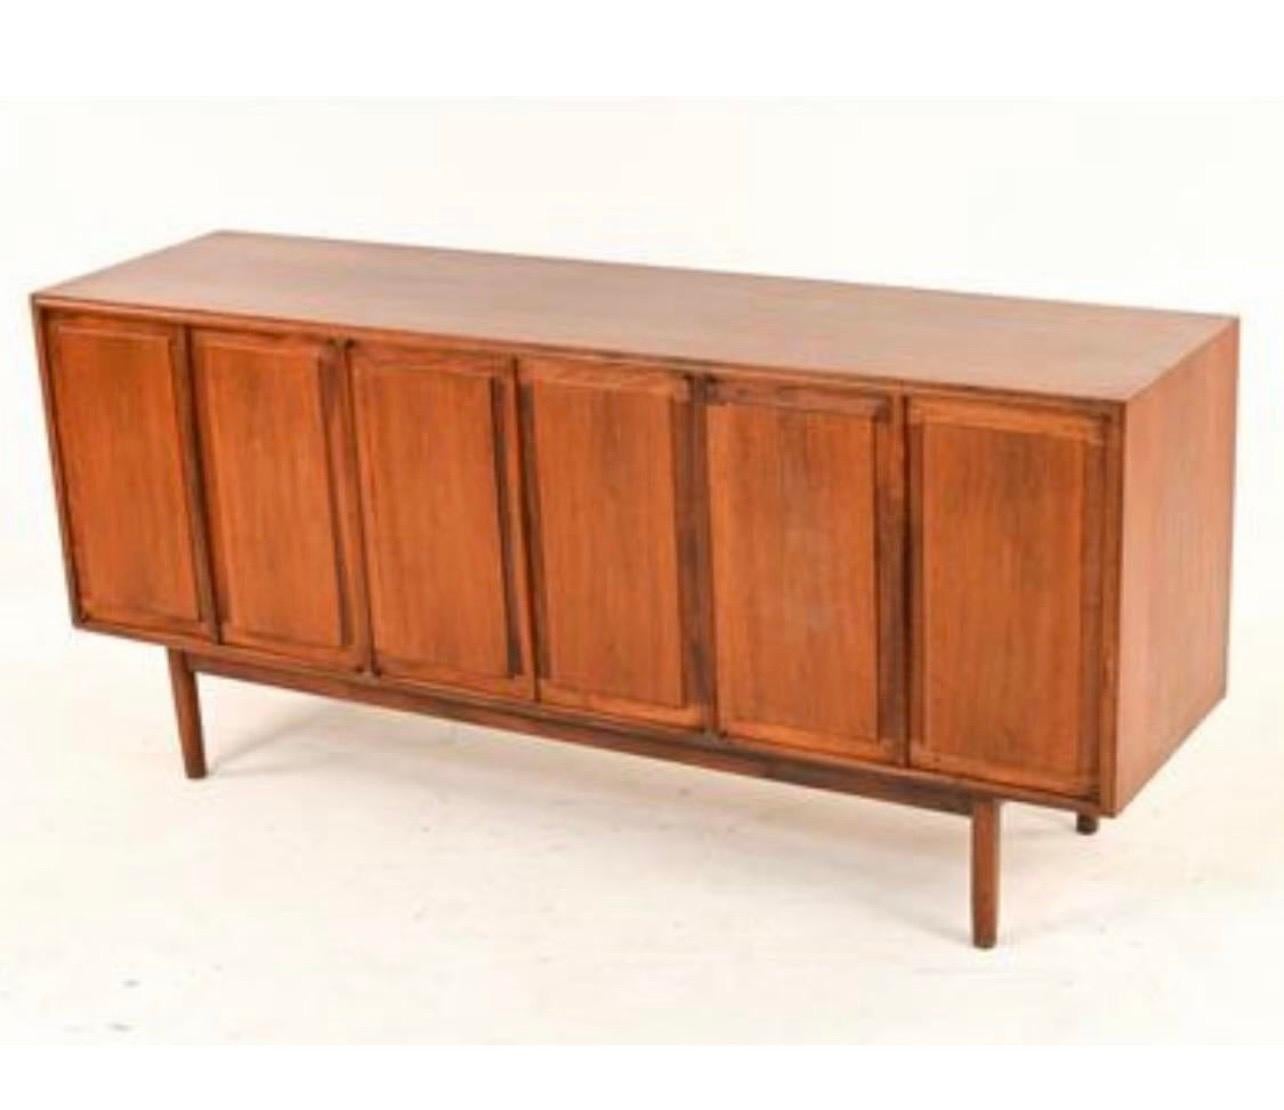 Iconic two-piece teak and walnut midcentury credenza where the top piece can float over the bottom piece or sit on top as we have photographed. The measurements below show height as measured with the top piece resting on top.
The height of the